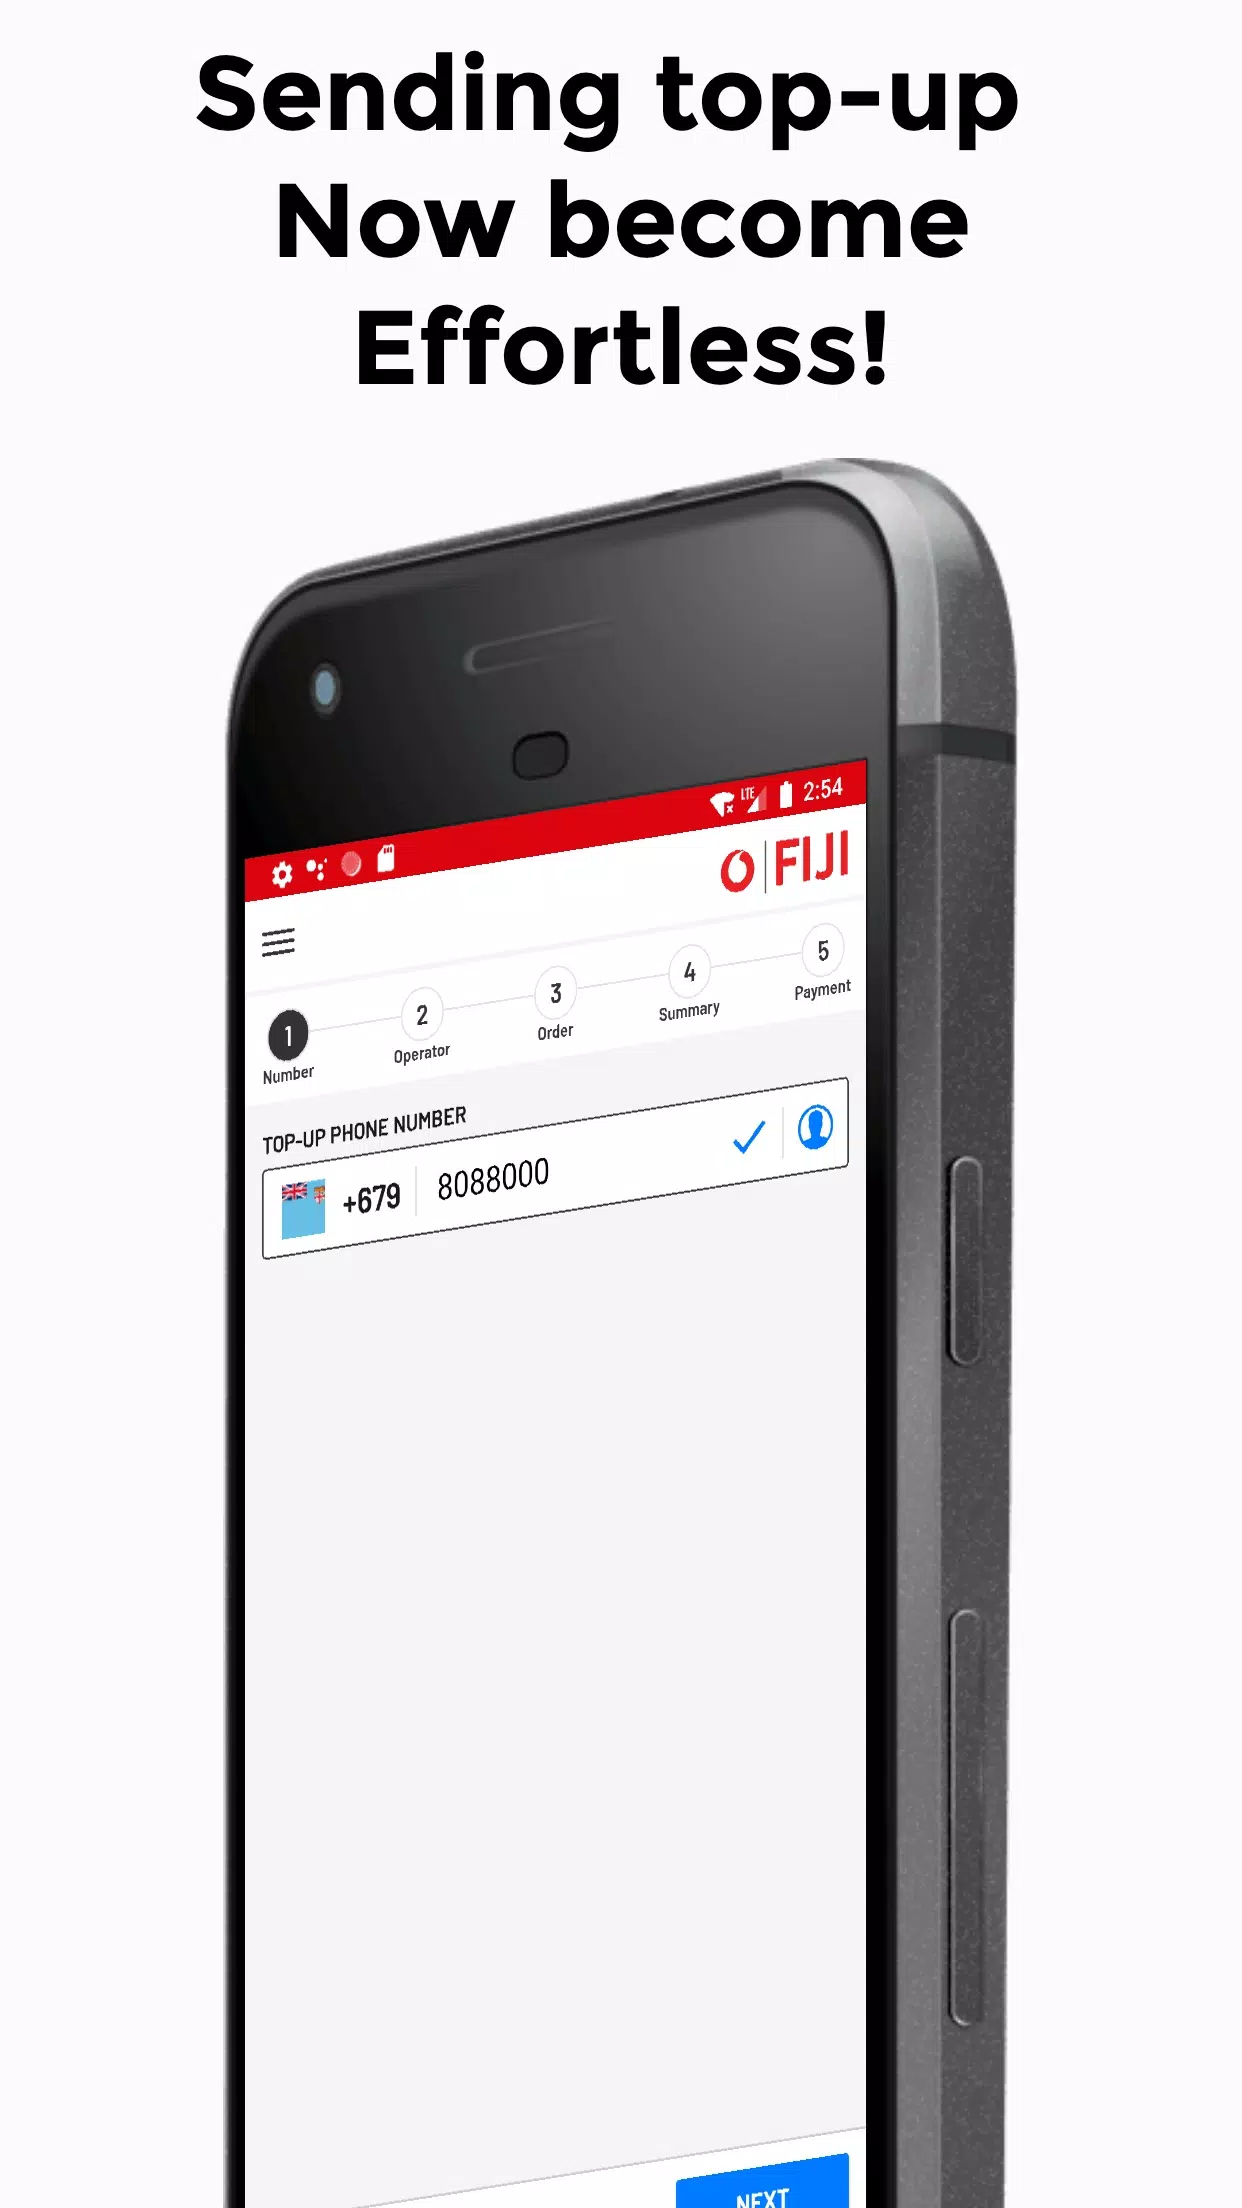 Vodafone Fiji Top-Up for Android - APK Download